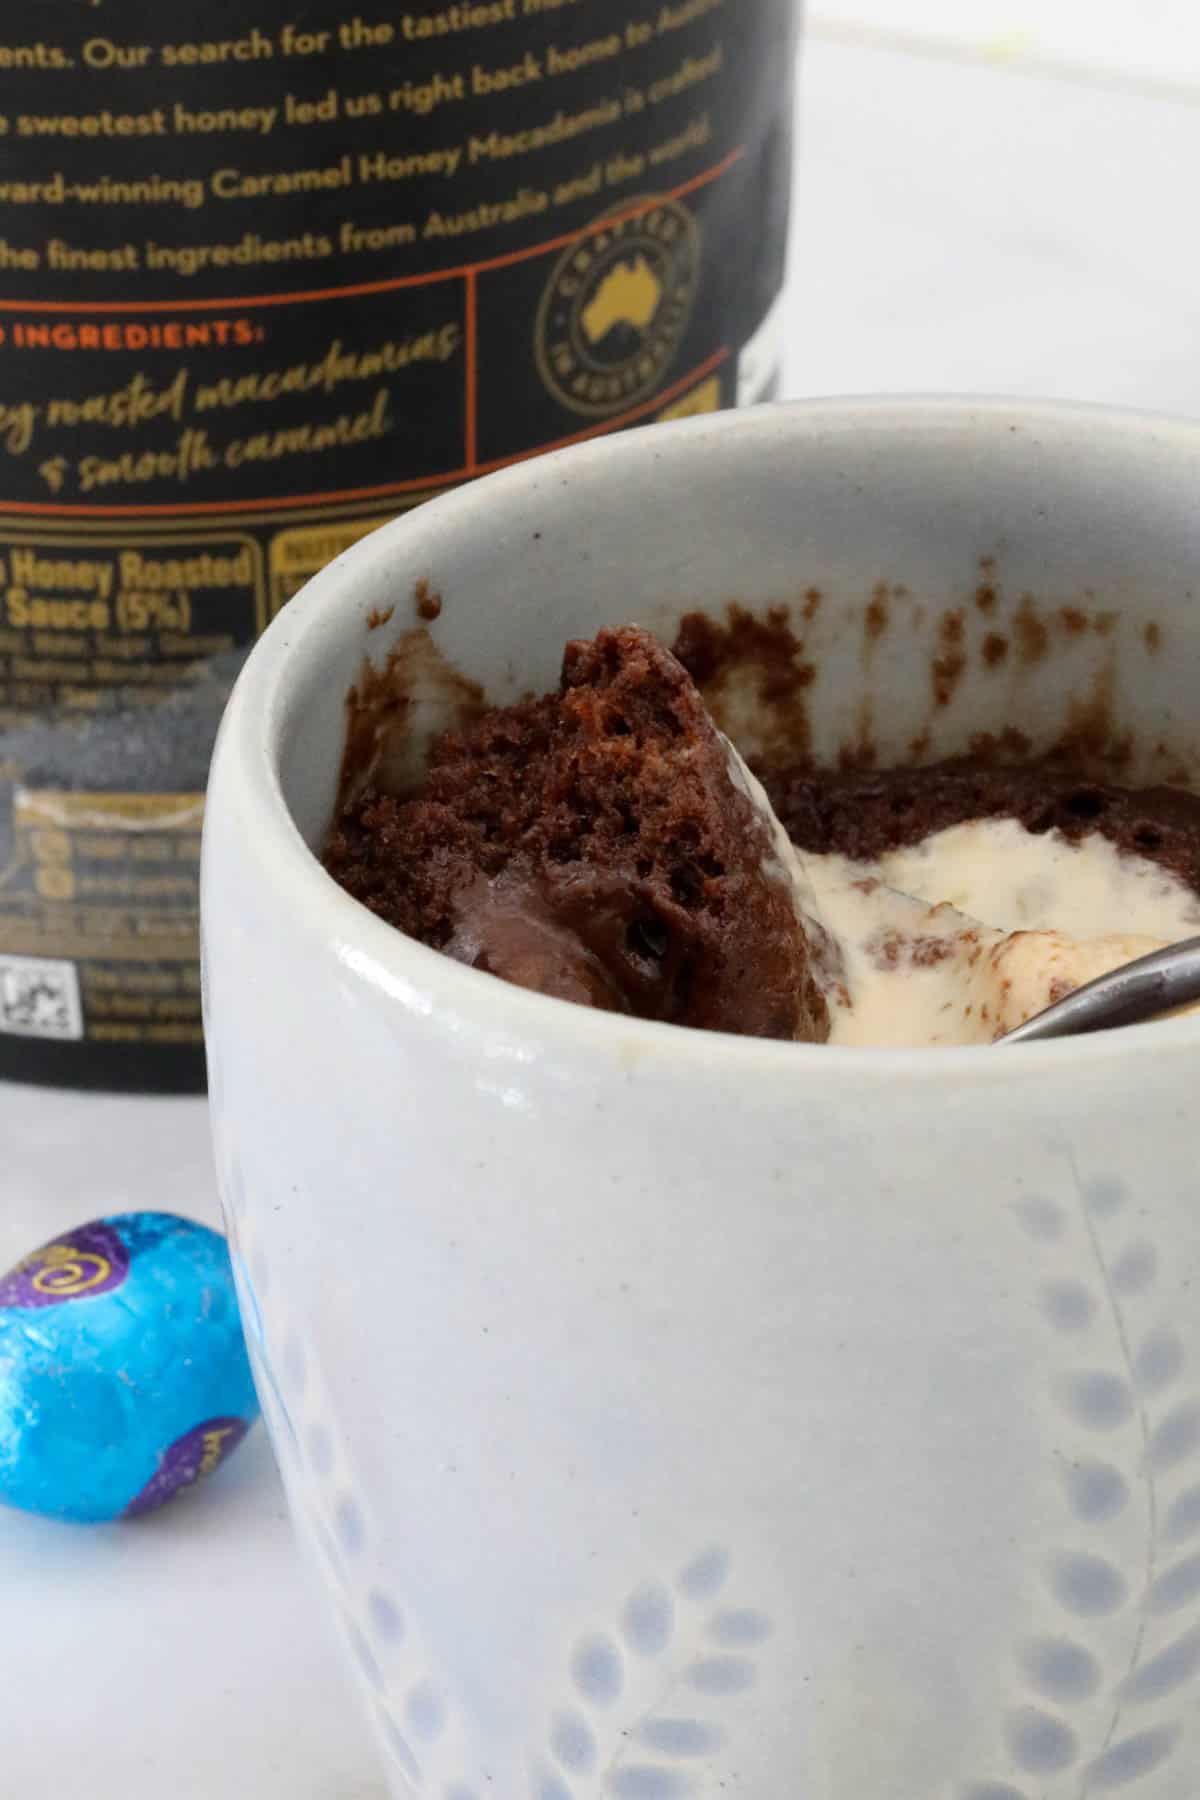 The cake with ice cream in a large white mug.